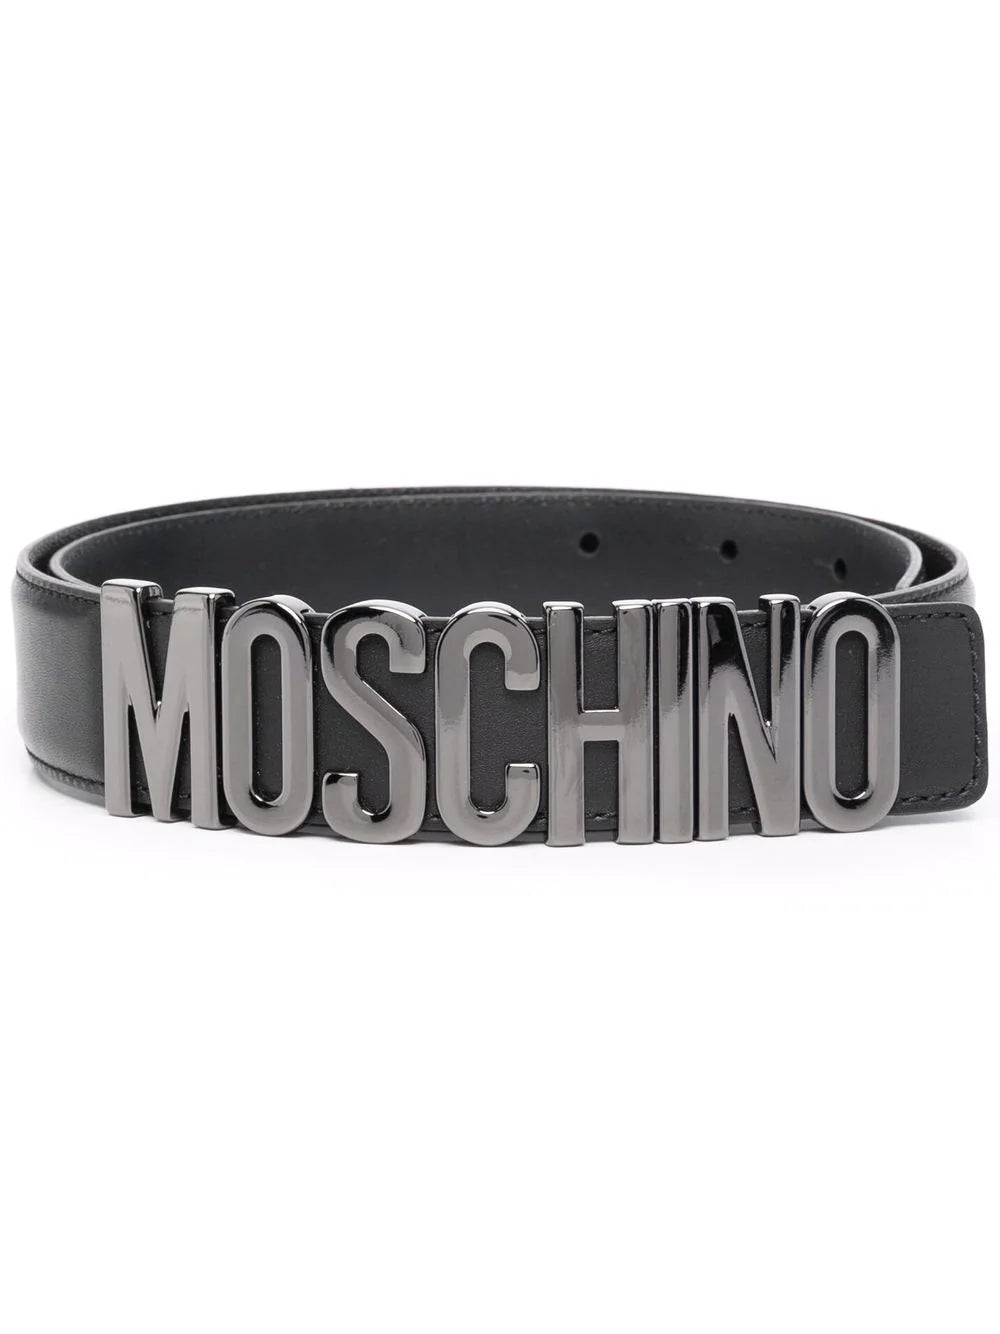 Moschino Black Belt with Ruthenium Logo Letters